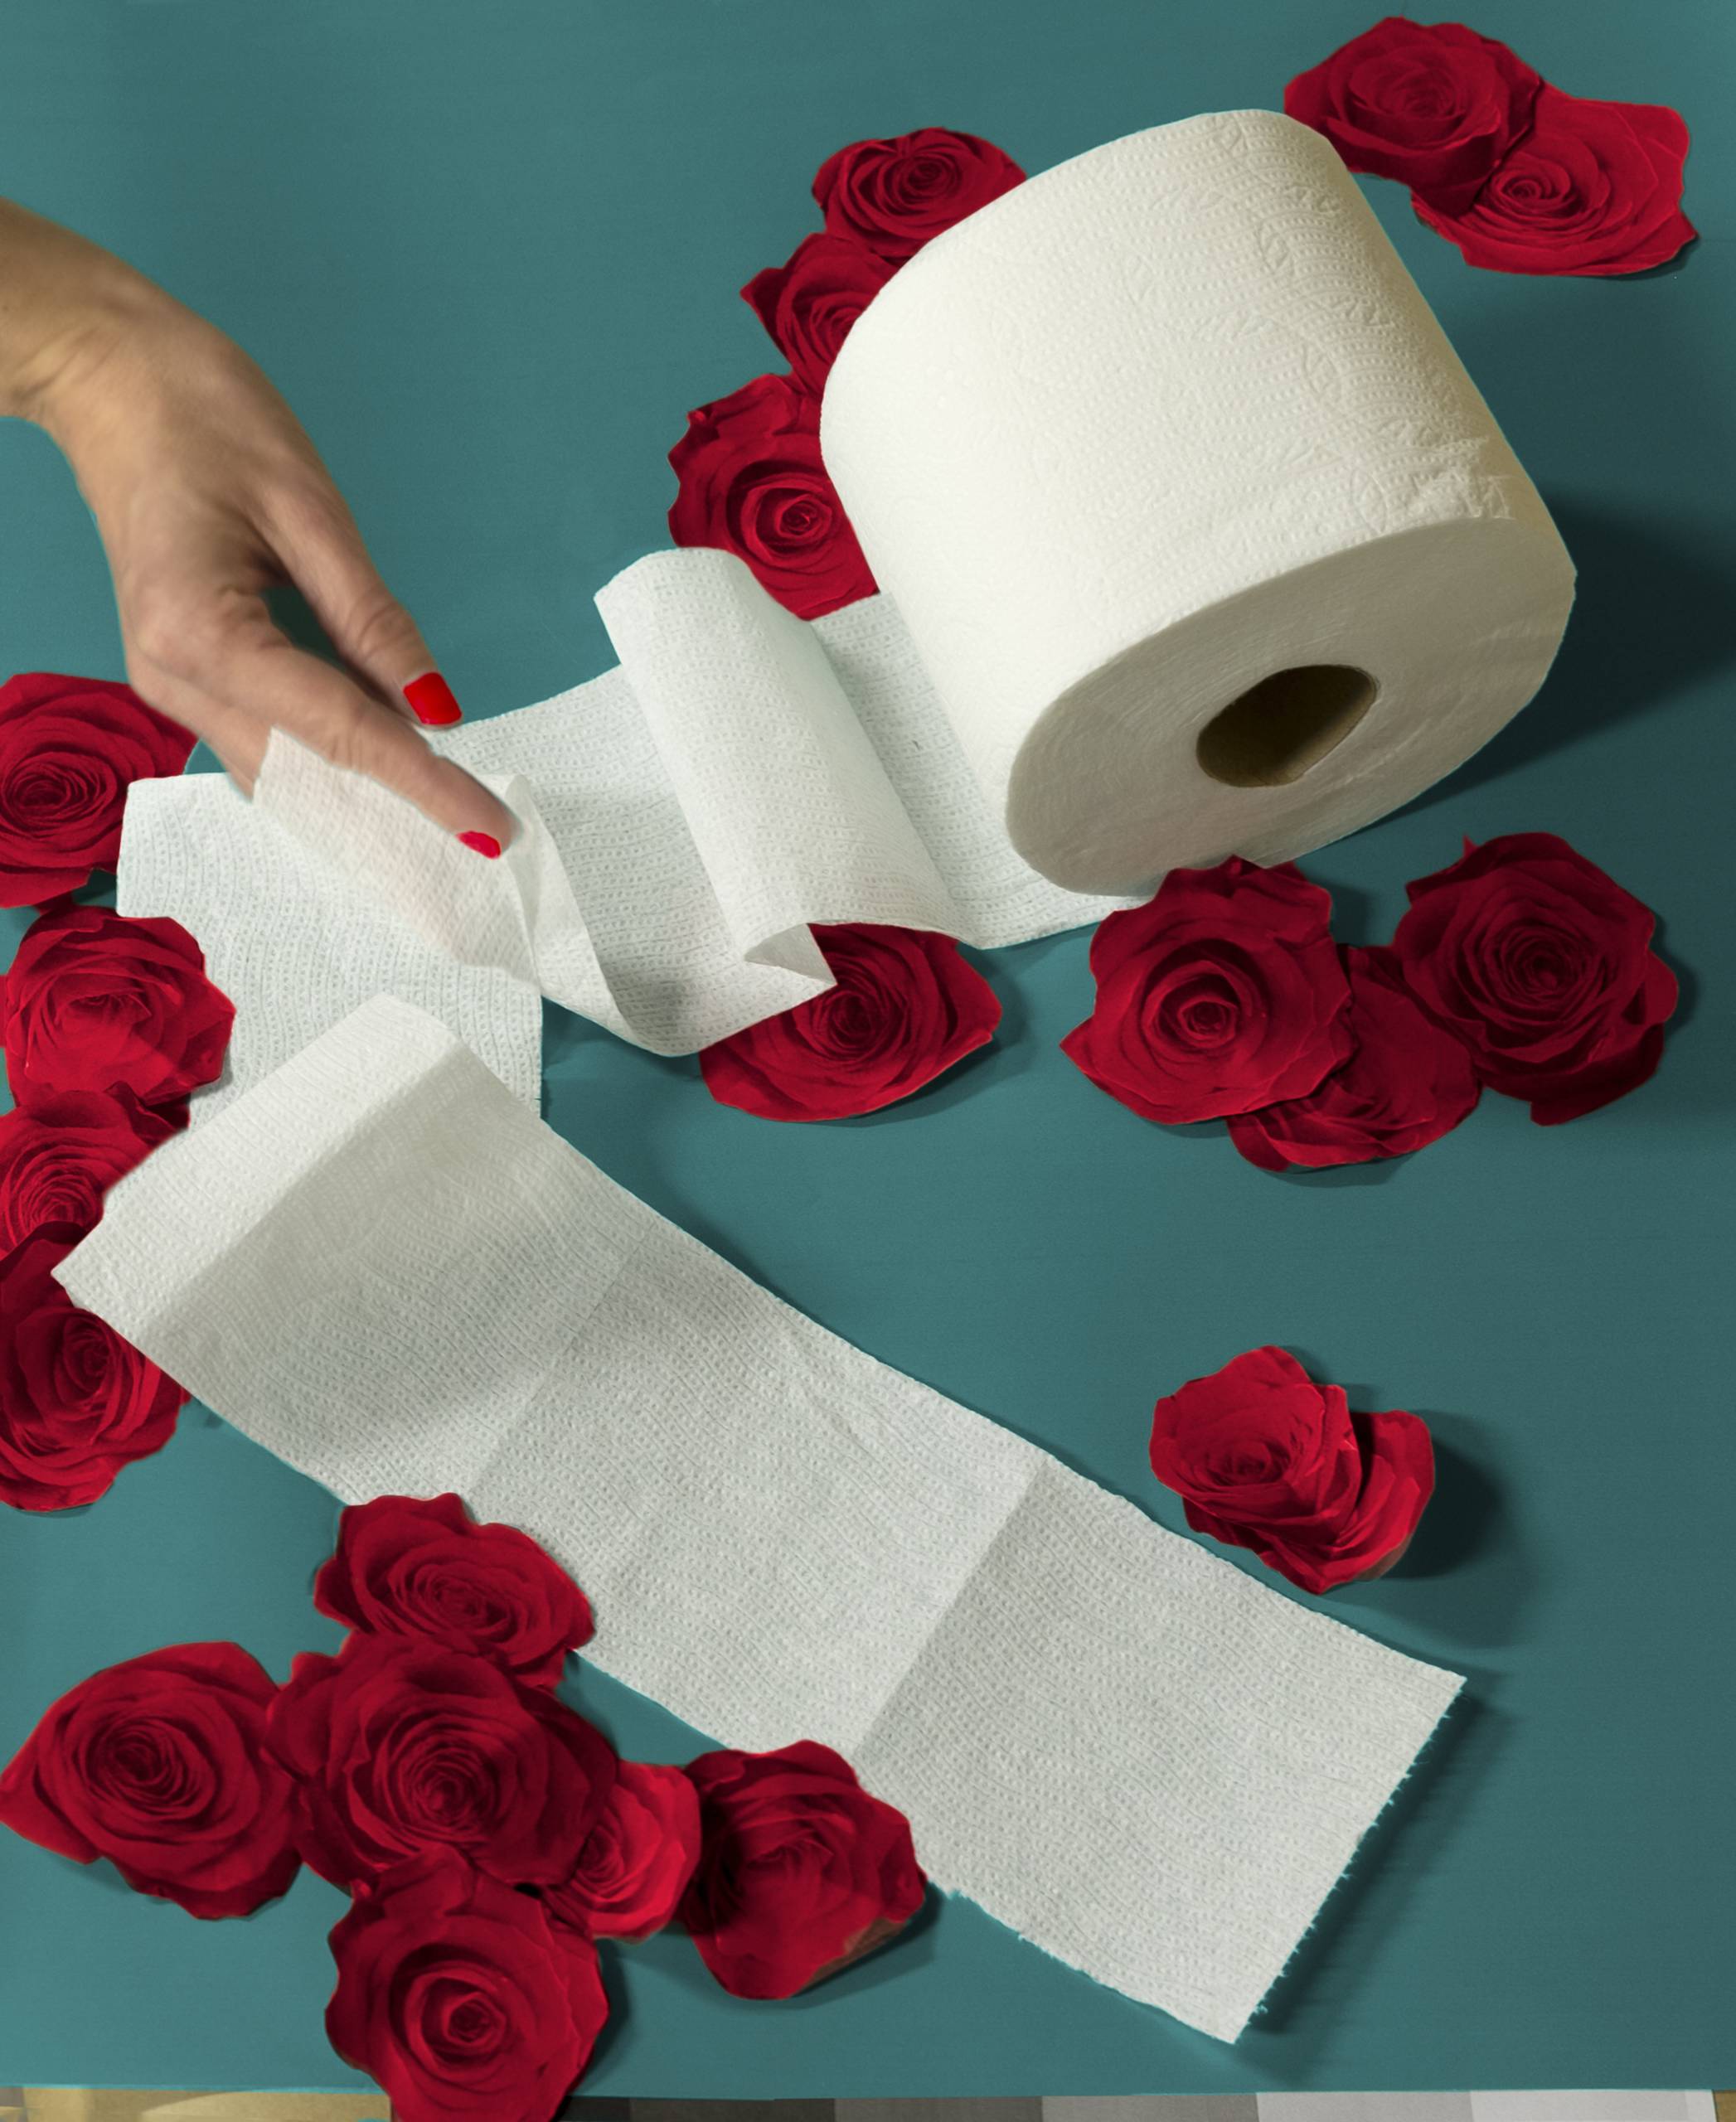 White hand with red nails touches unrolled toilet paper among cut-outs of red roses on teal background